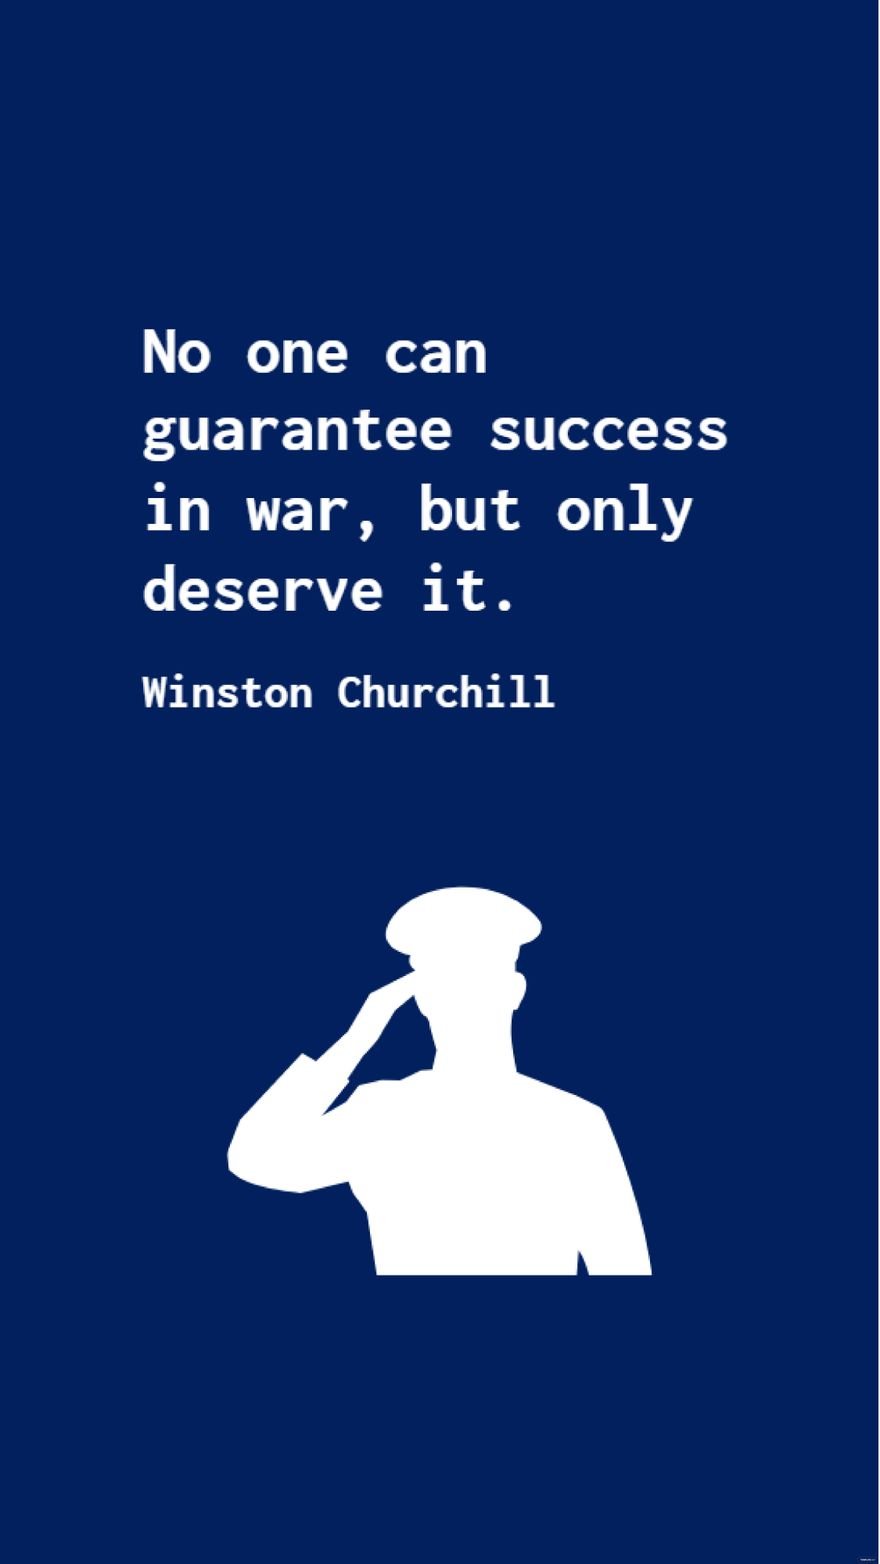 Winston Churchill - No one can guarantee success in war, but only deserve it.